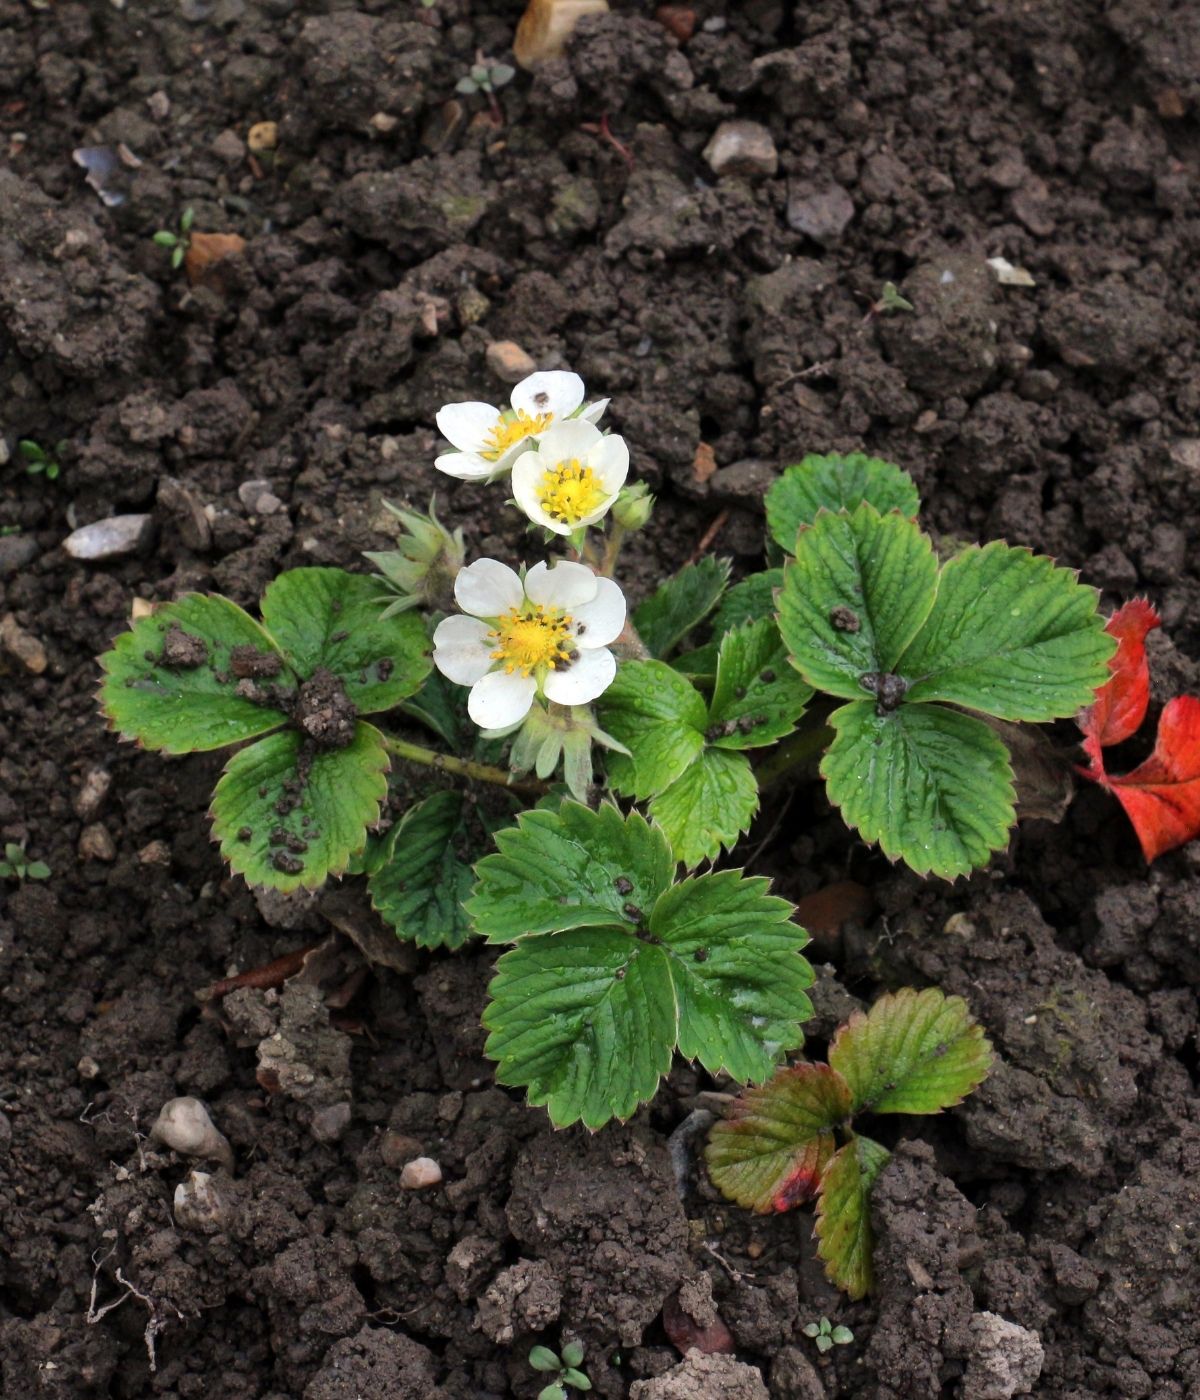 Young strawberry plant flowering.